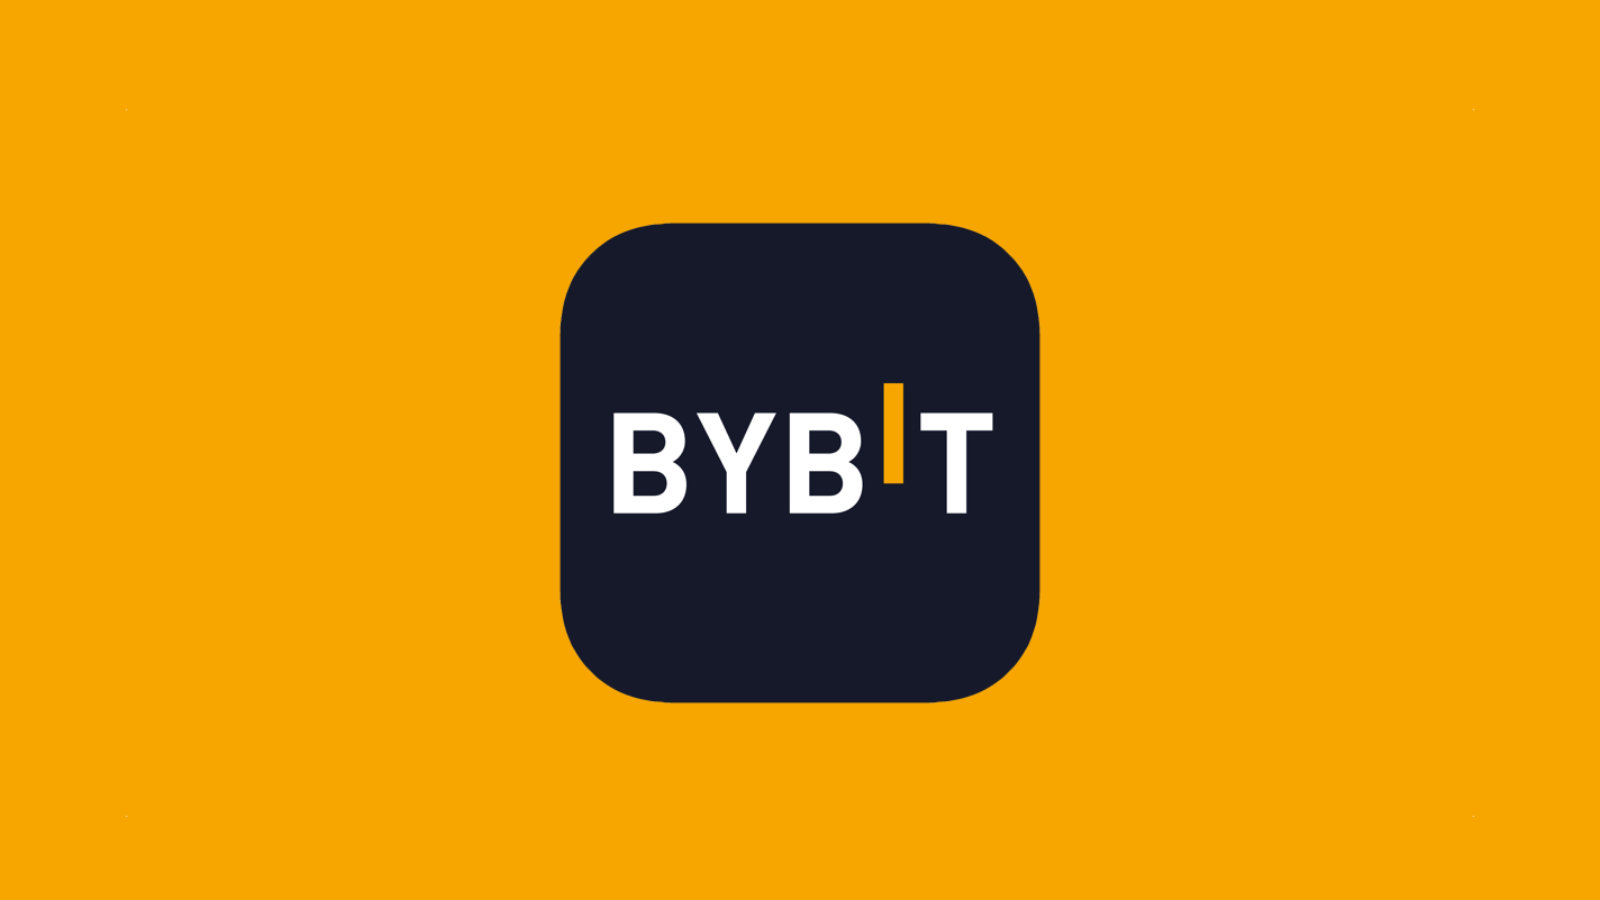 What is Bybit?